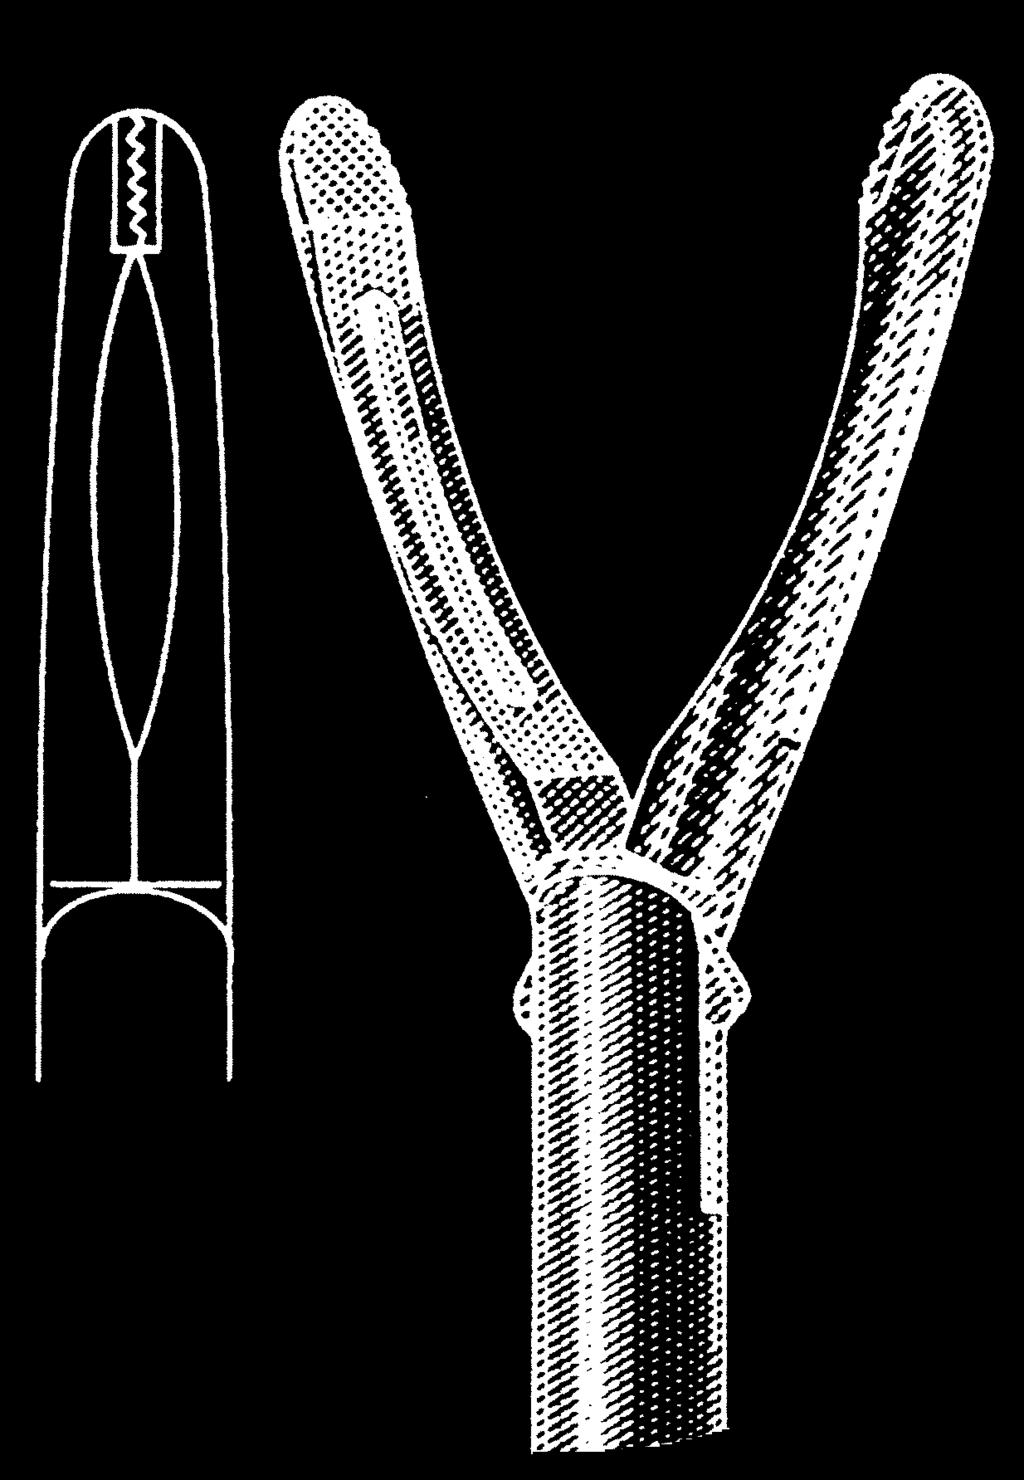 20 Grasping Forceps 2 230 Integra Jarit grasping forceps feature a hinge mechanism to assure strength and durability. Precisely calibrated ratchets provide smooth, gradual closure of jaws.